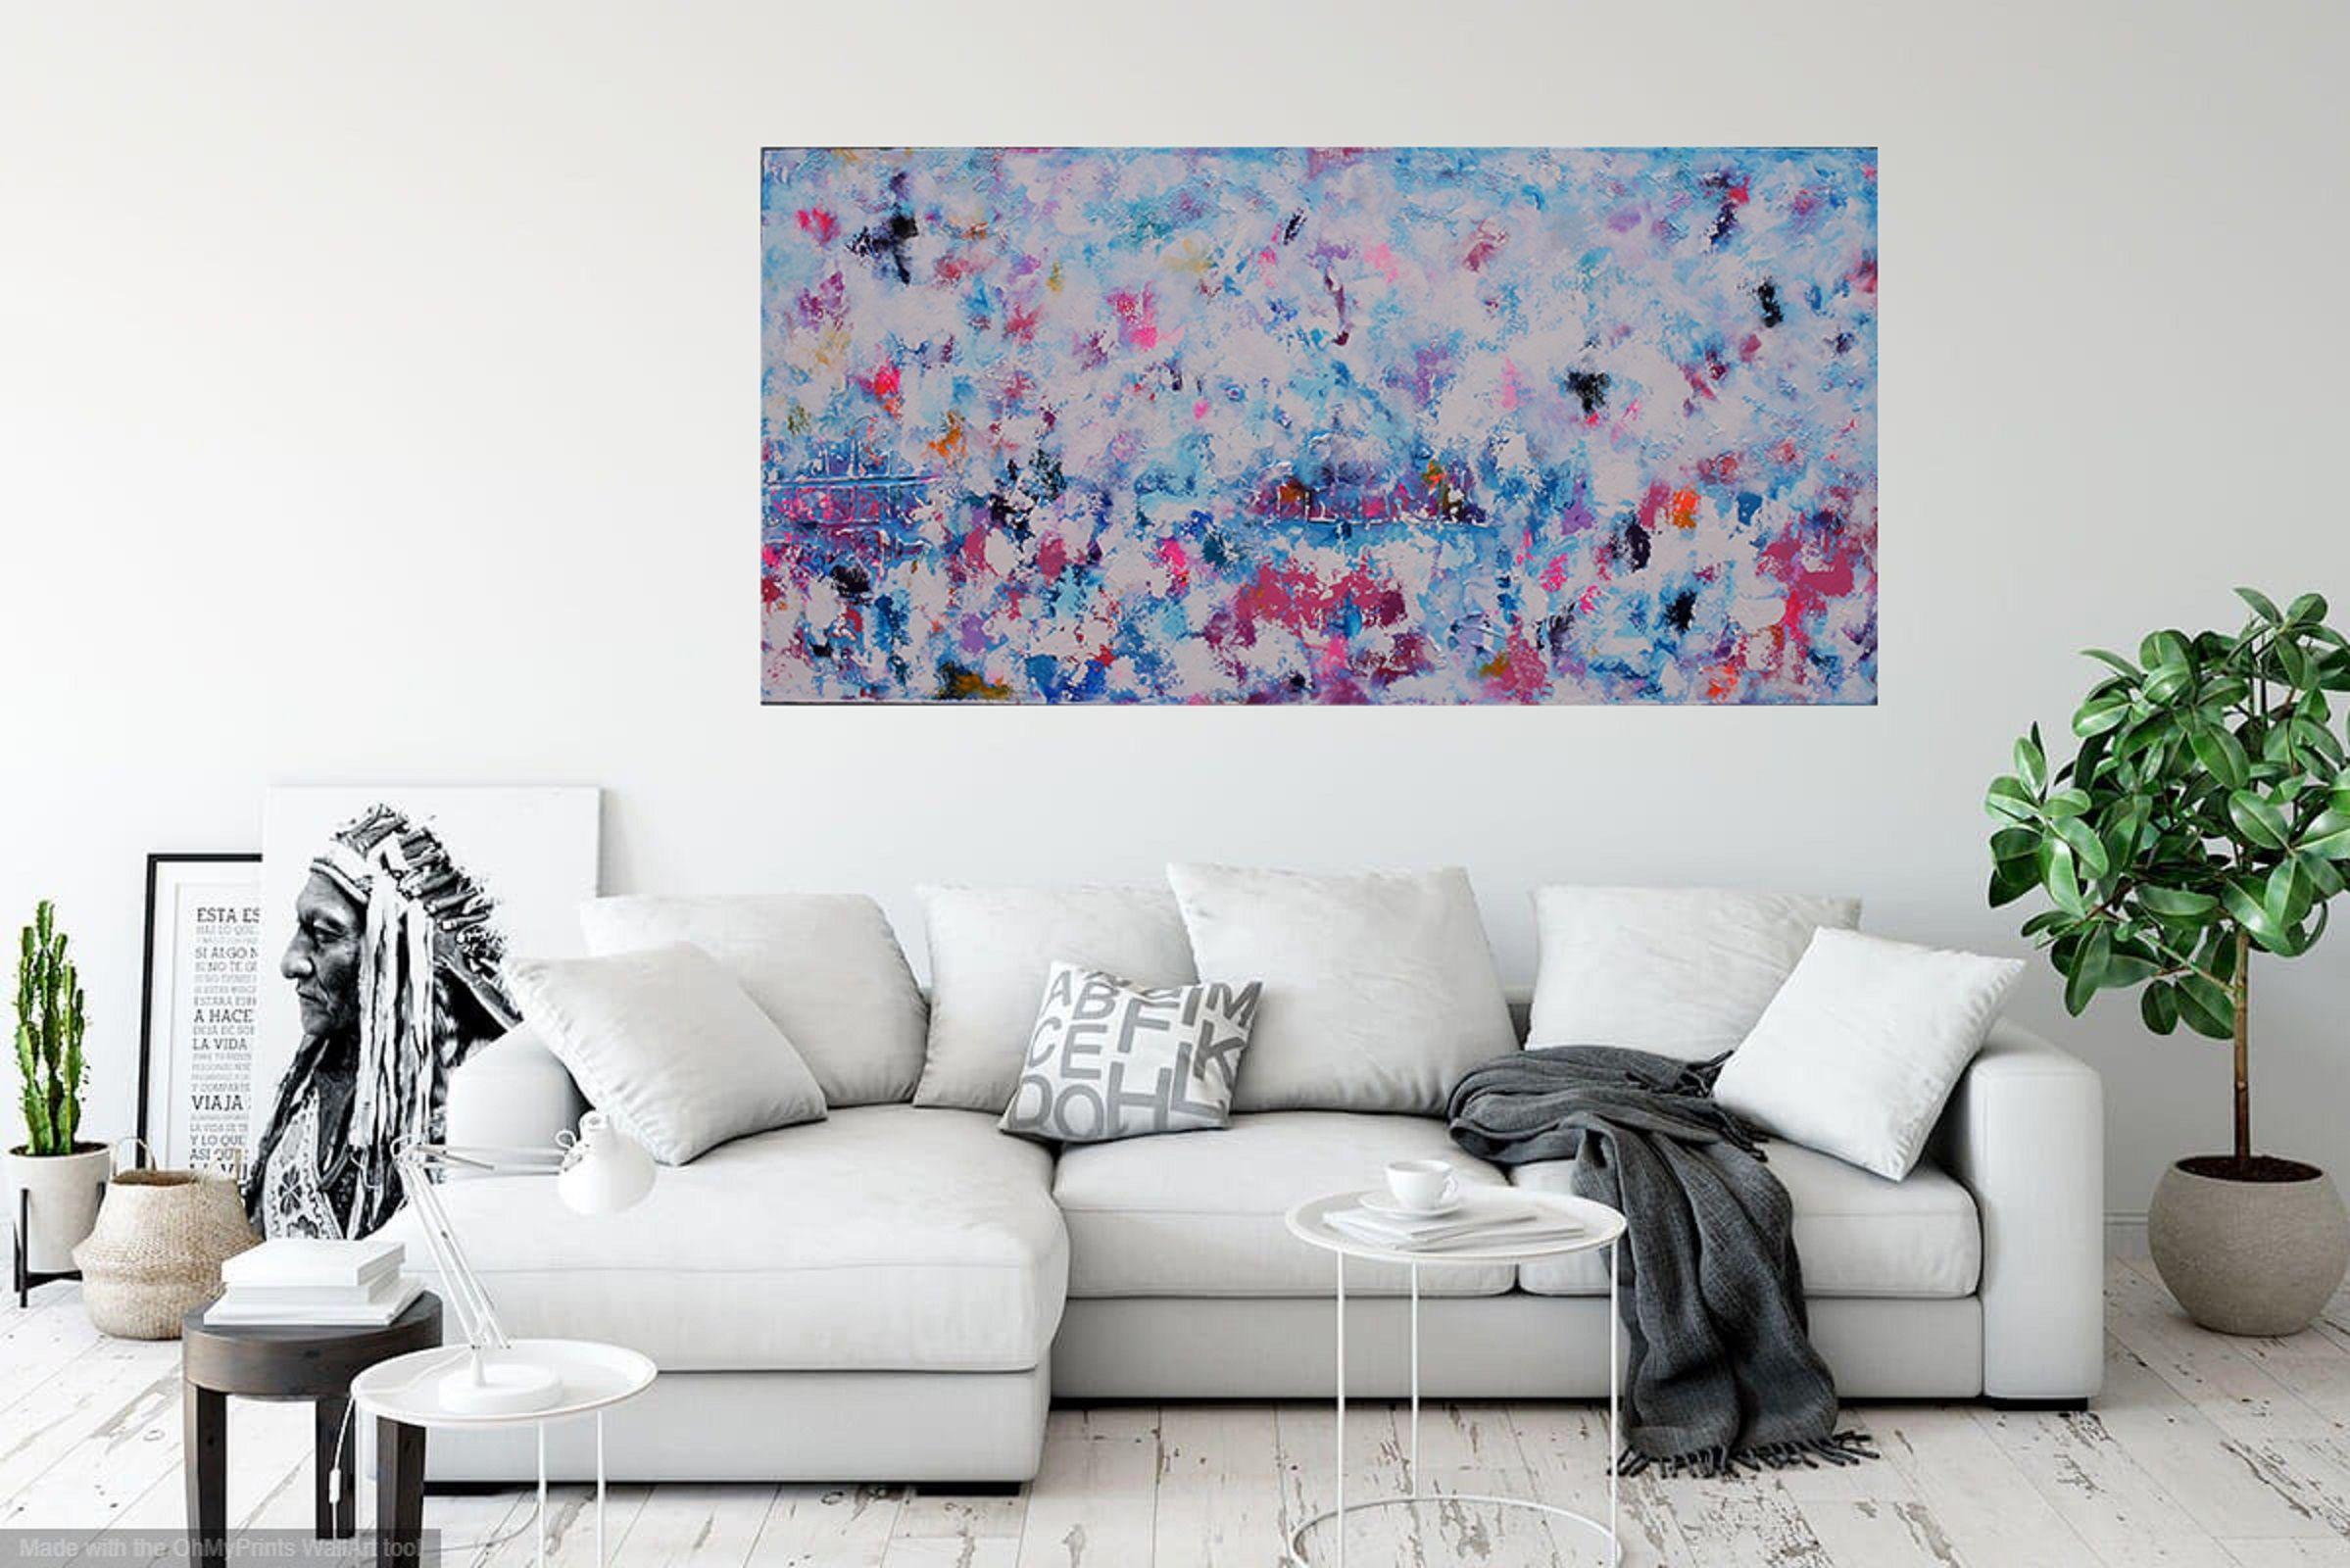 XXL Tropical Island II 121.9 x 61cm Textured Abstract Painting    Deep texture, structure and cracks have been used to create a shabby chic effect using a Turquoise, Dusky Pinks, Blues and White    A juxtaposition of soft and delicate with accents